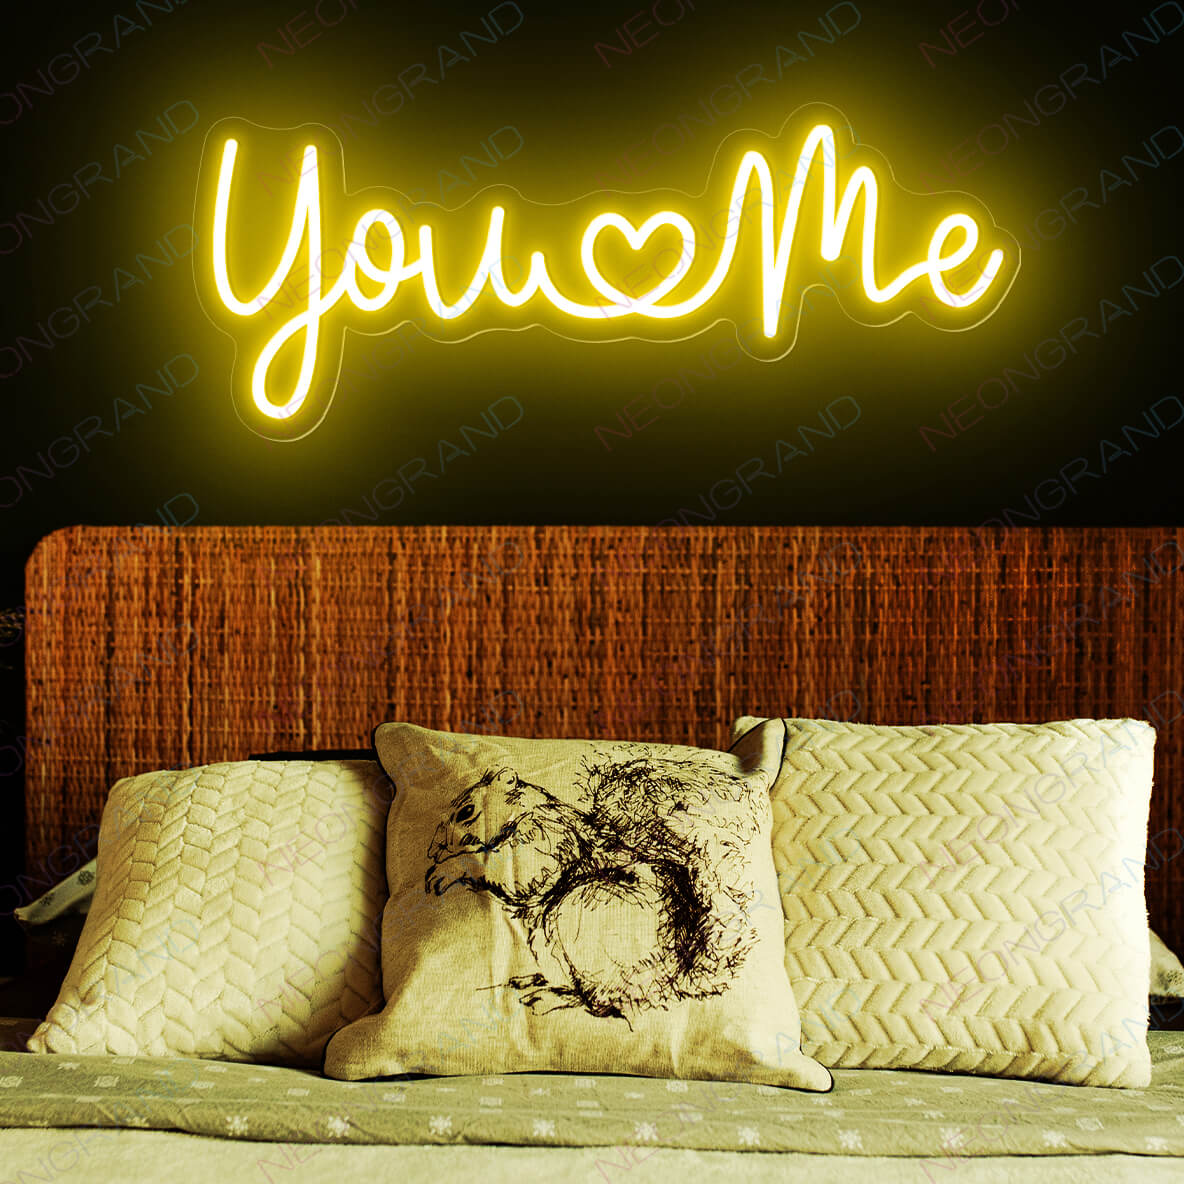 You And Me Neon Sign Love Led Light yellow wm